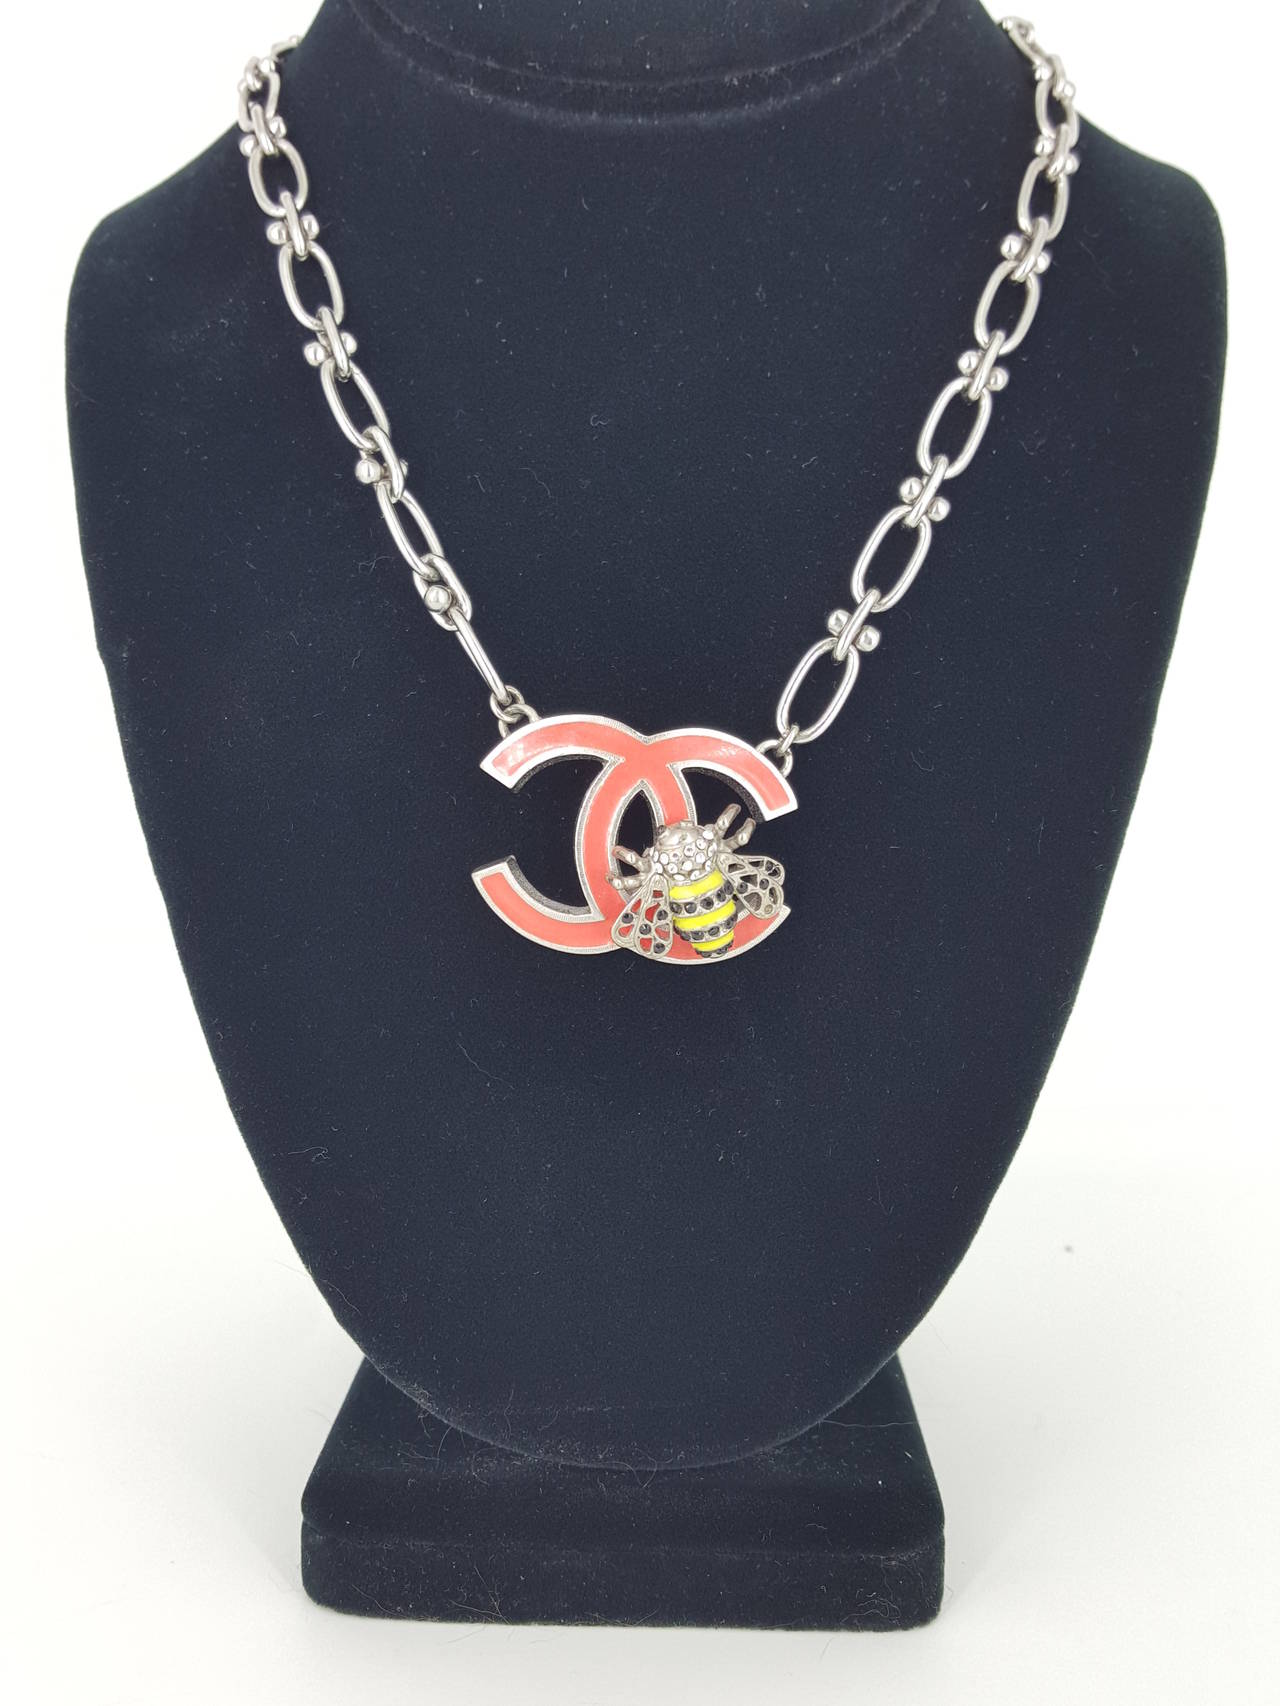 Offered for sale is this lovely Chanel necklace from 2004.  The large coral colored 